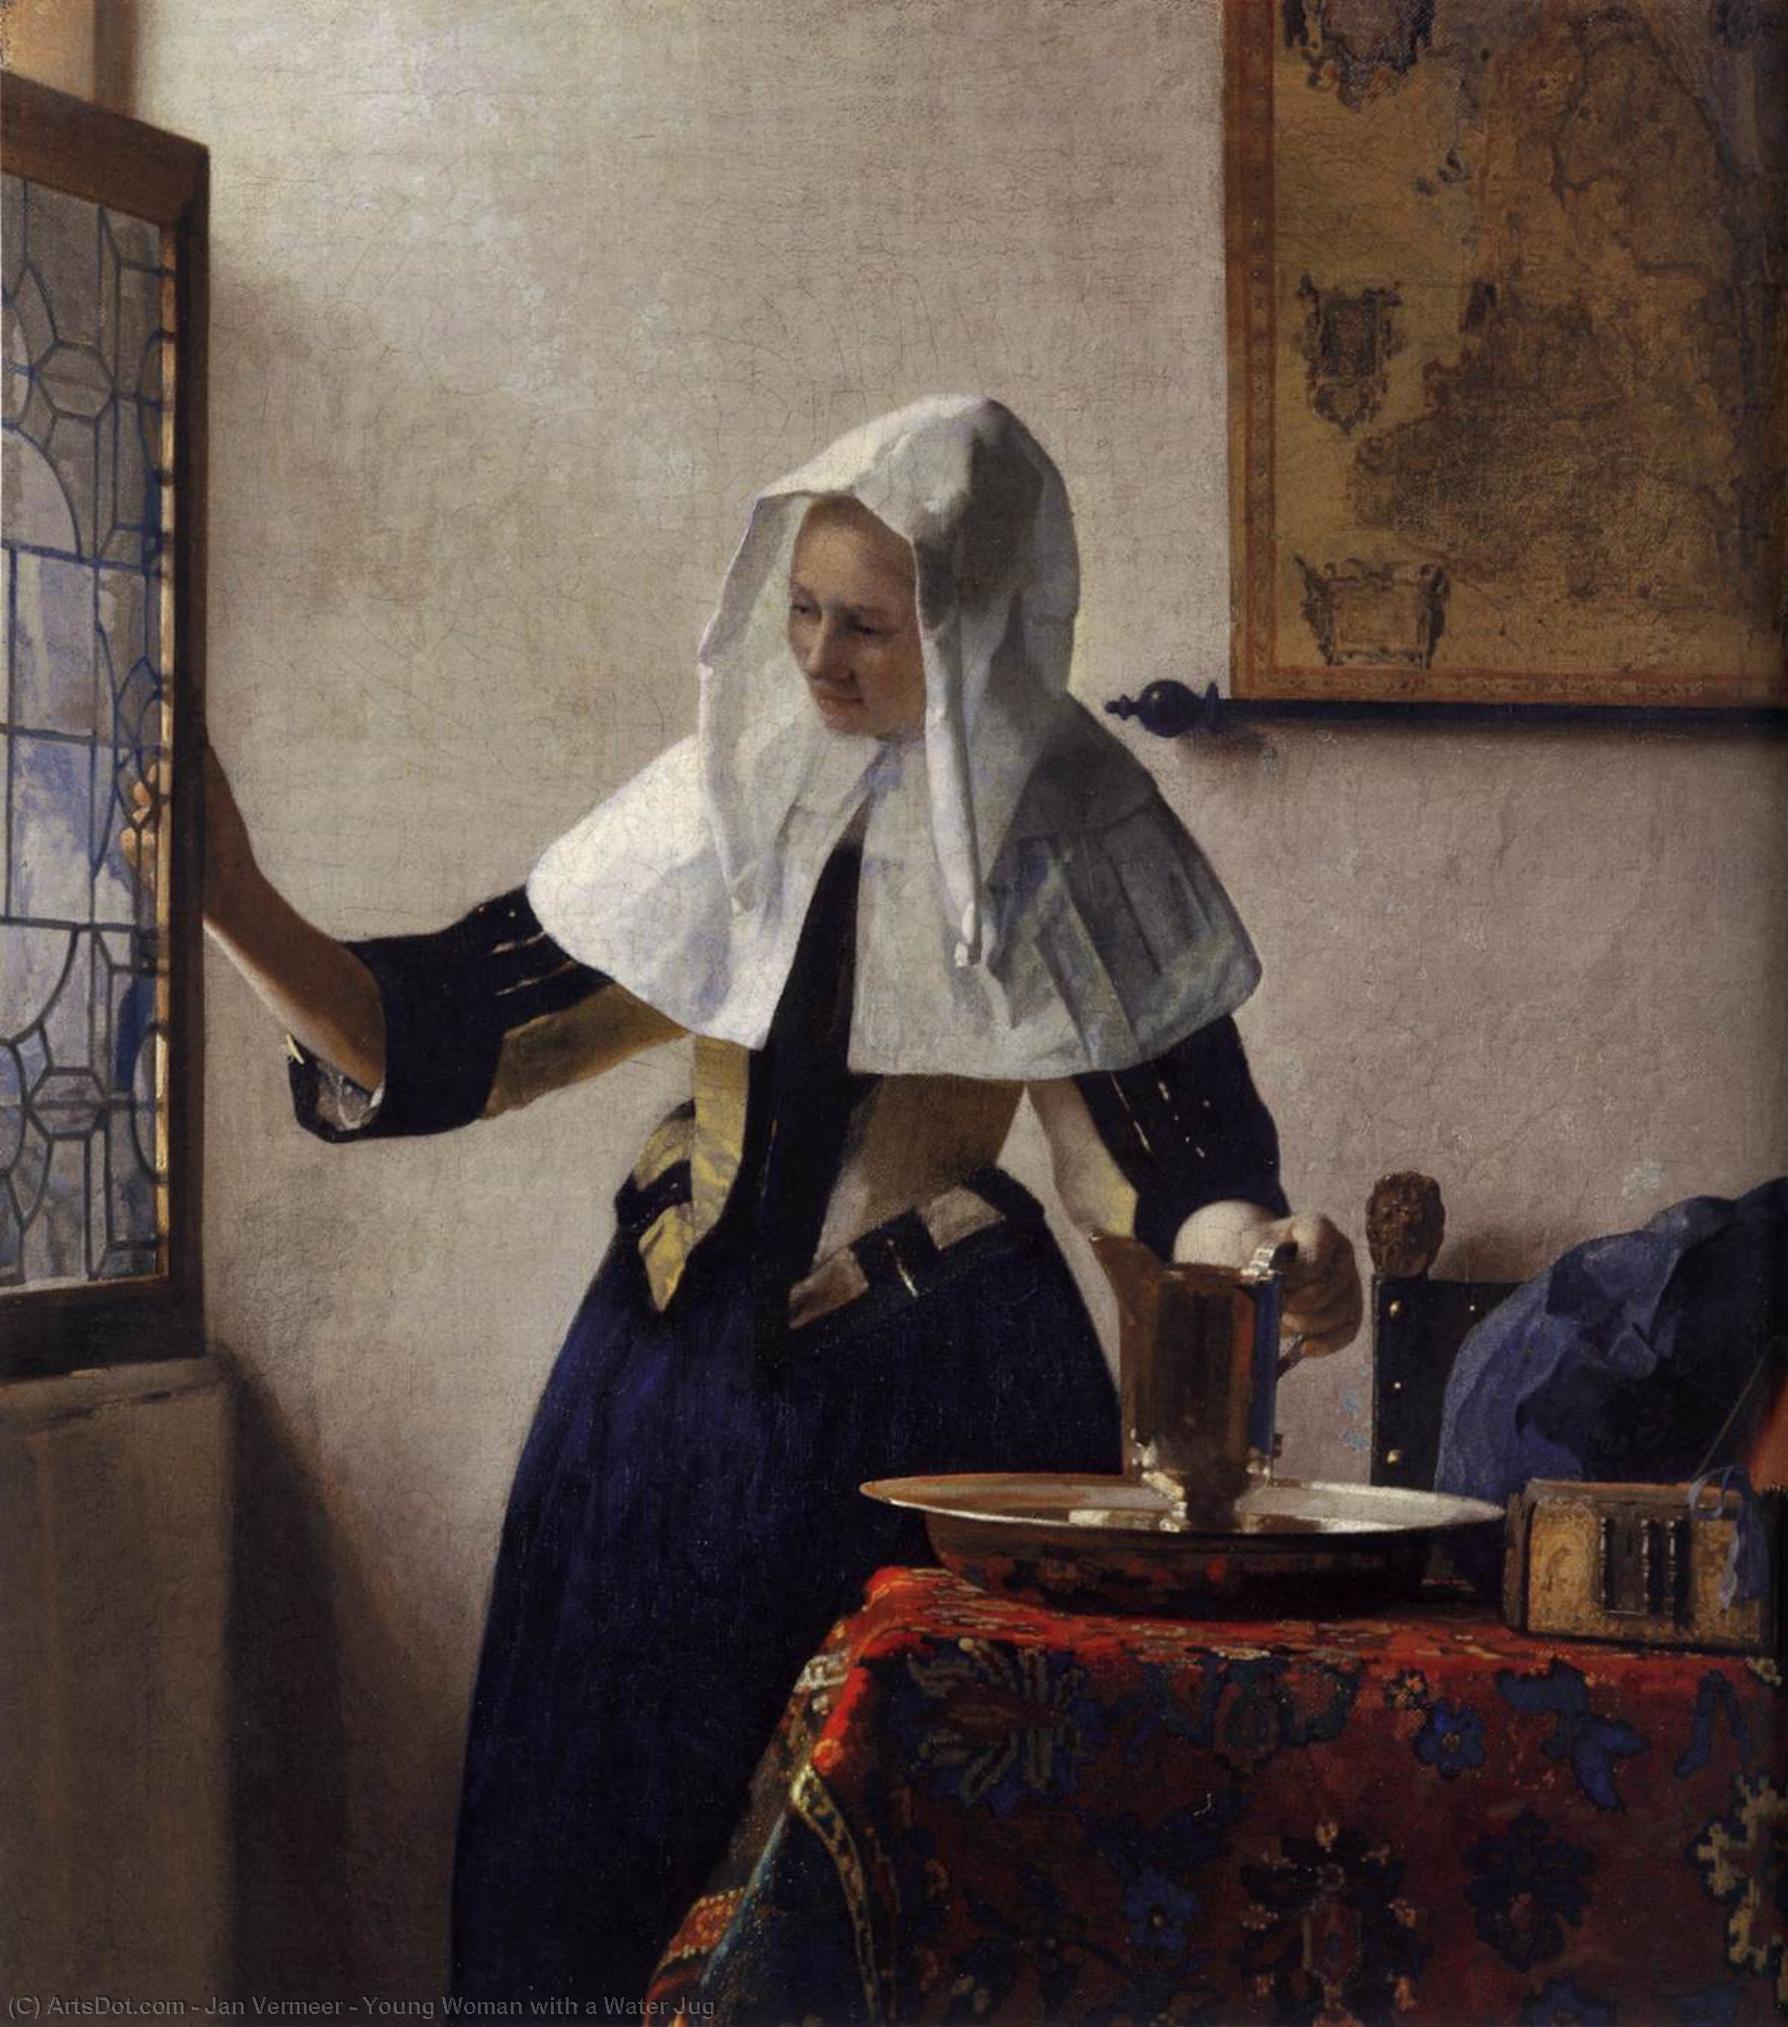 WikiOO.org - 백과 사전 - 회화, 삽화 Jan Vermeer - Young Woman with a Water Jug